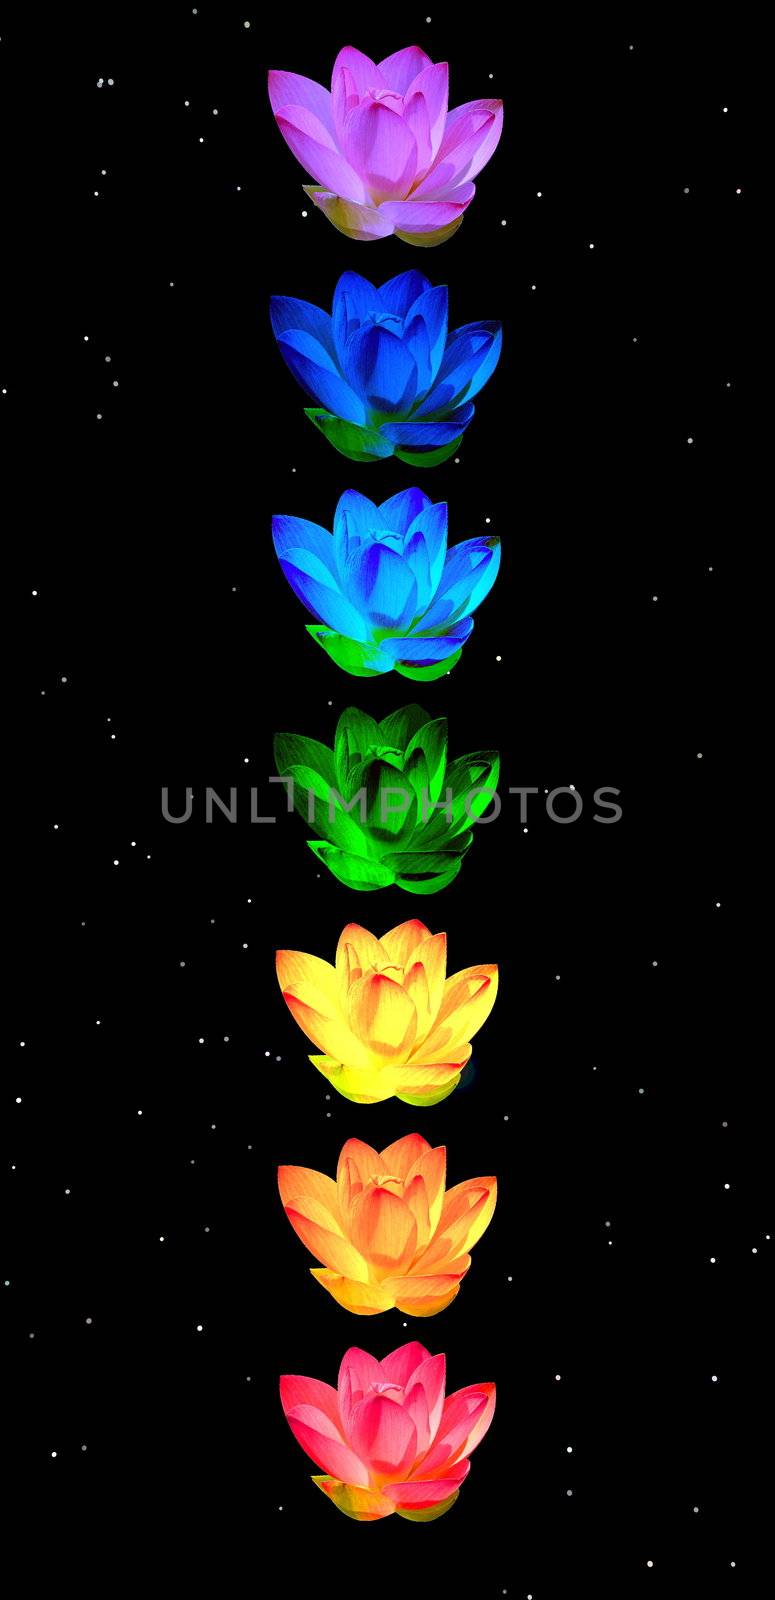 Chakra colors of lily flowers by Elenaphotos21